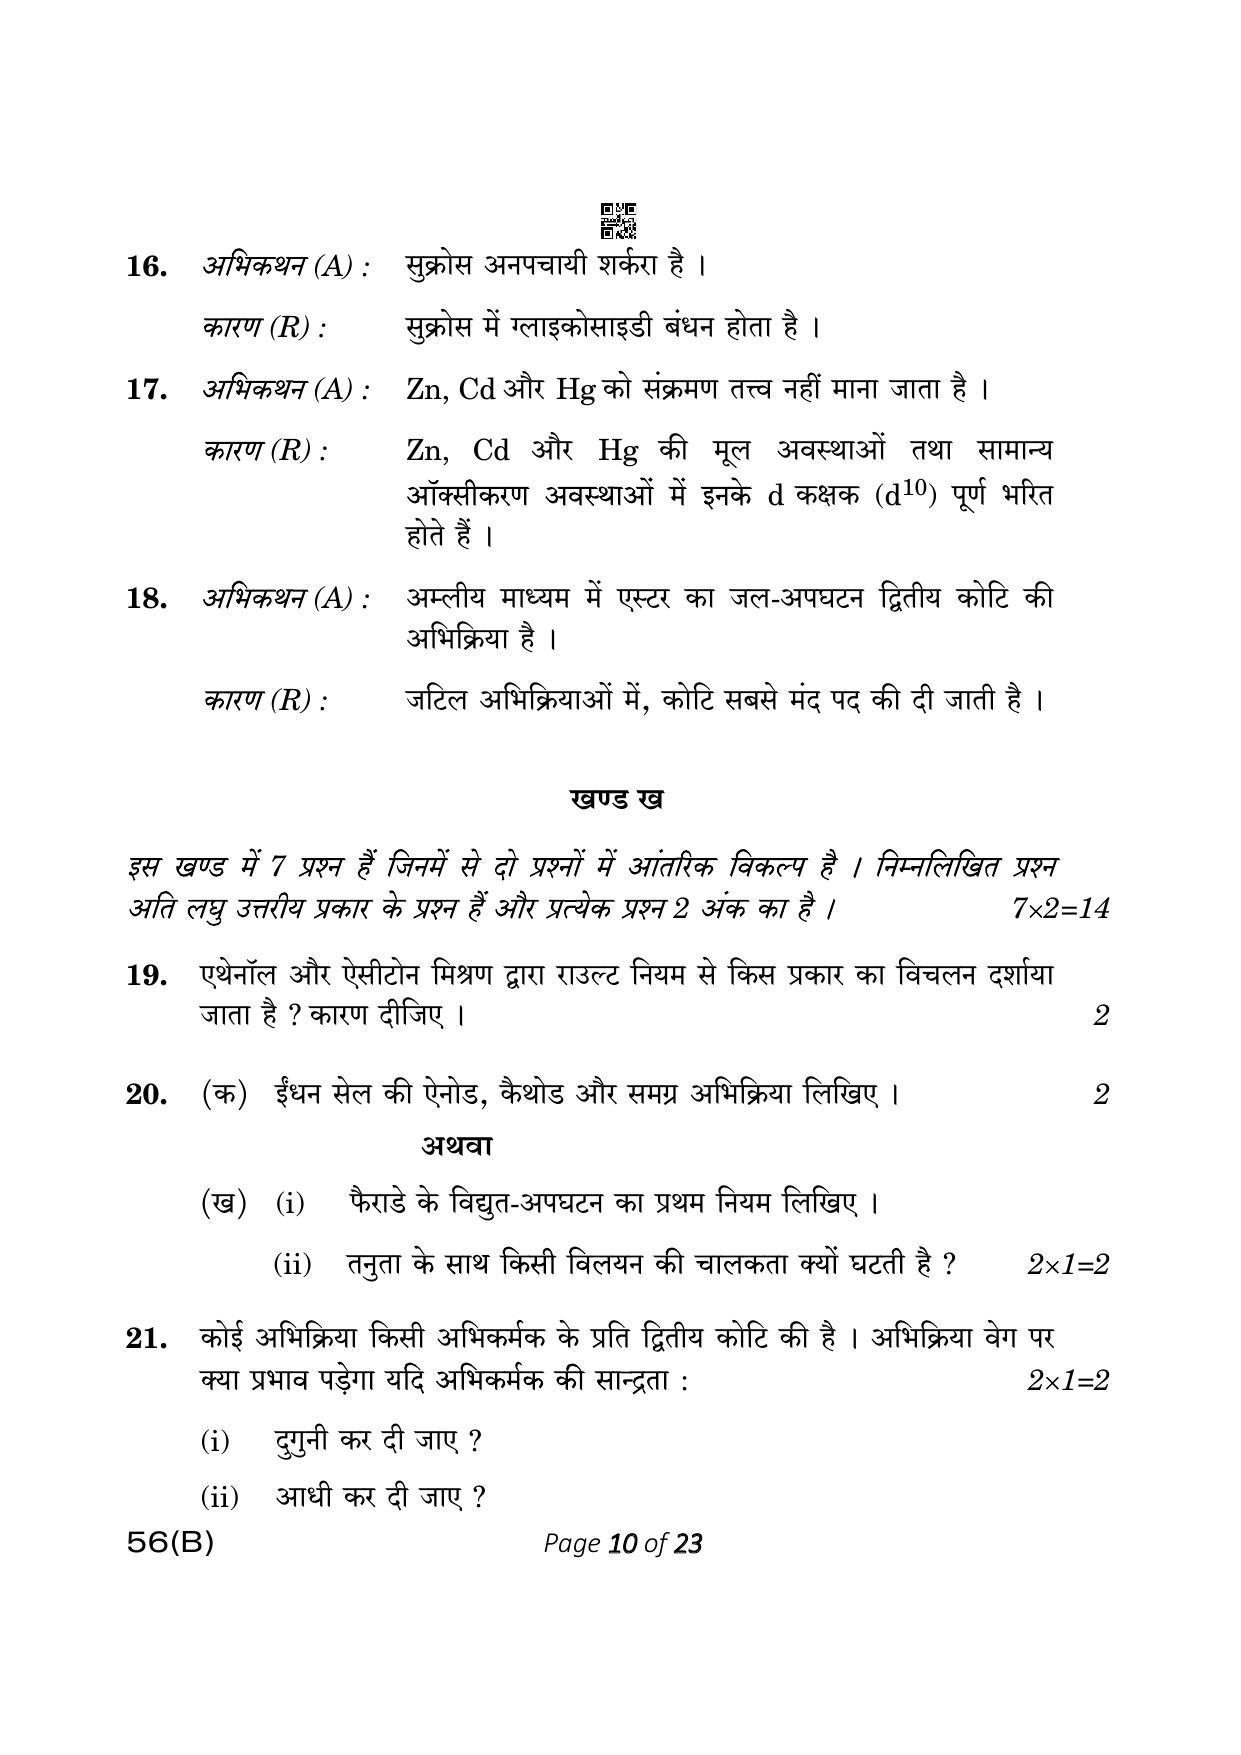 CBSE Class 12 56-B Chemistry 2023 (Compartment) Question Paper - Page 10